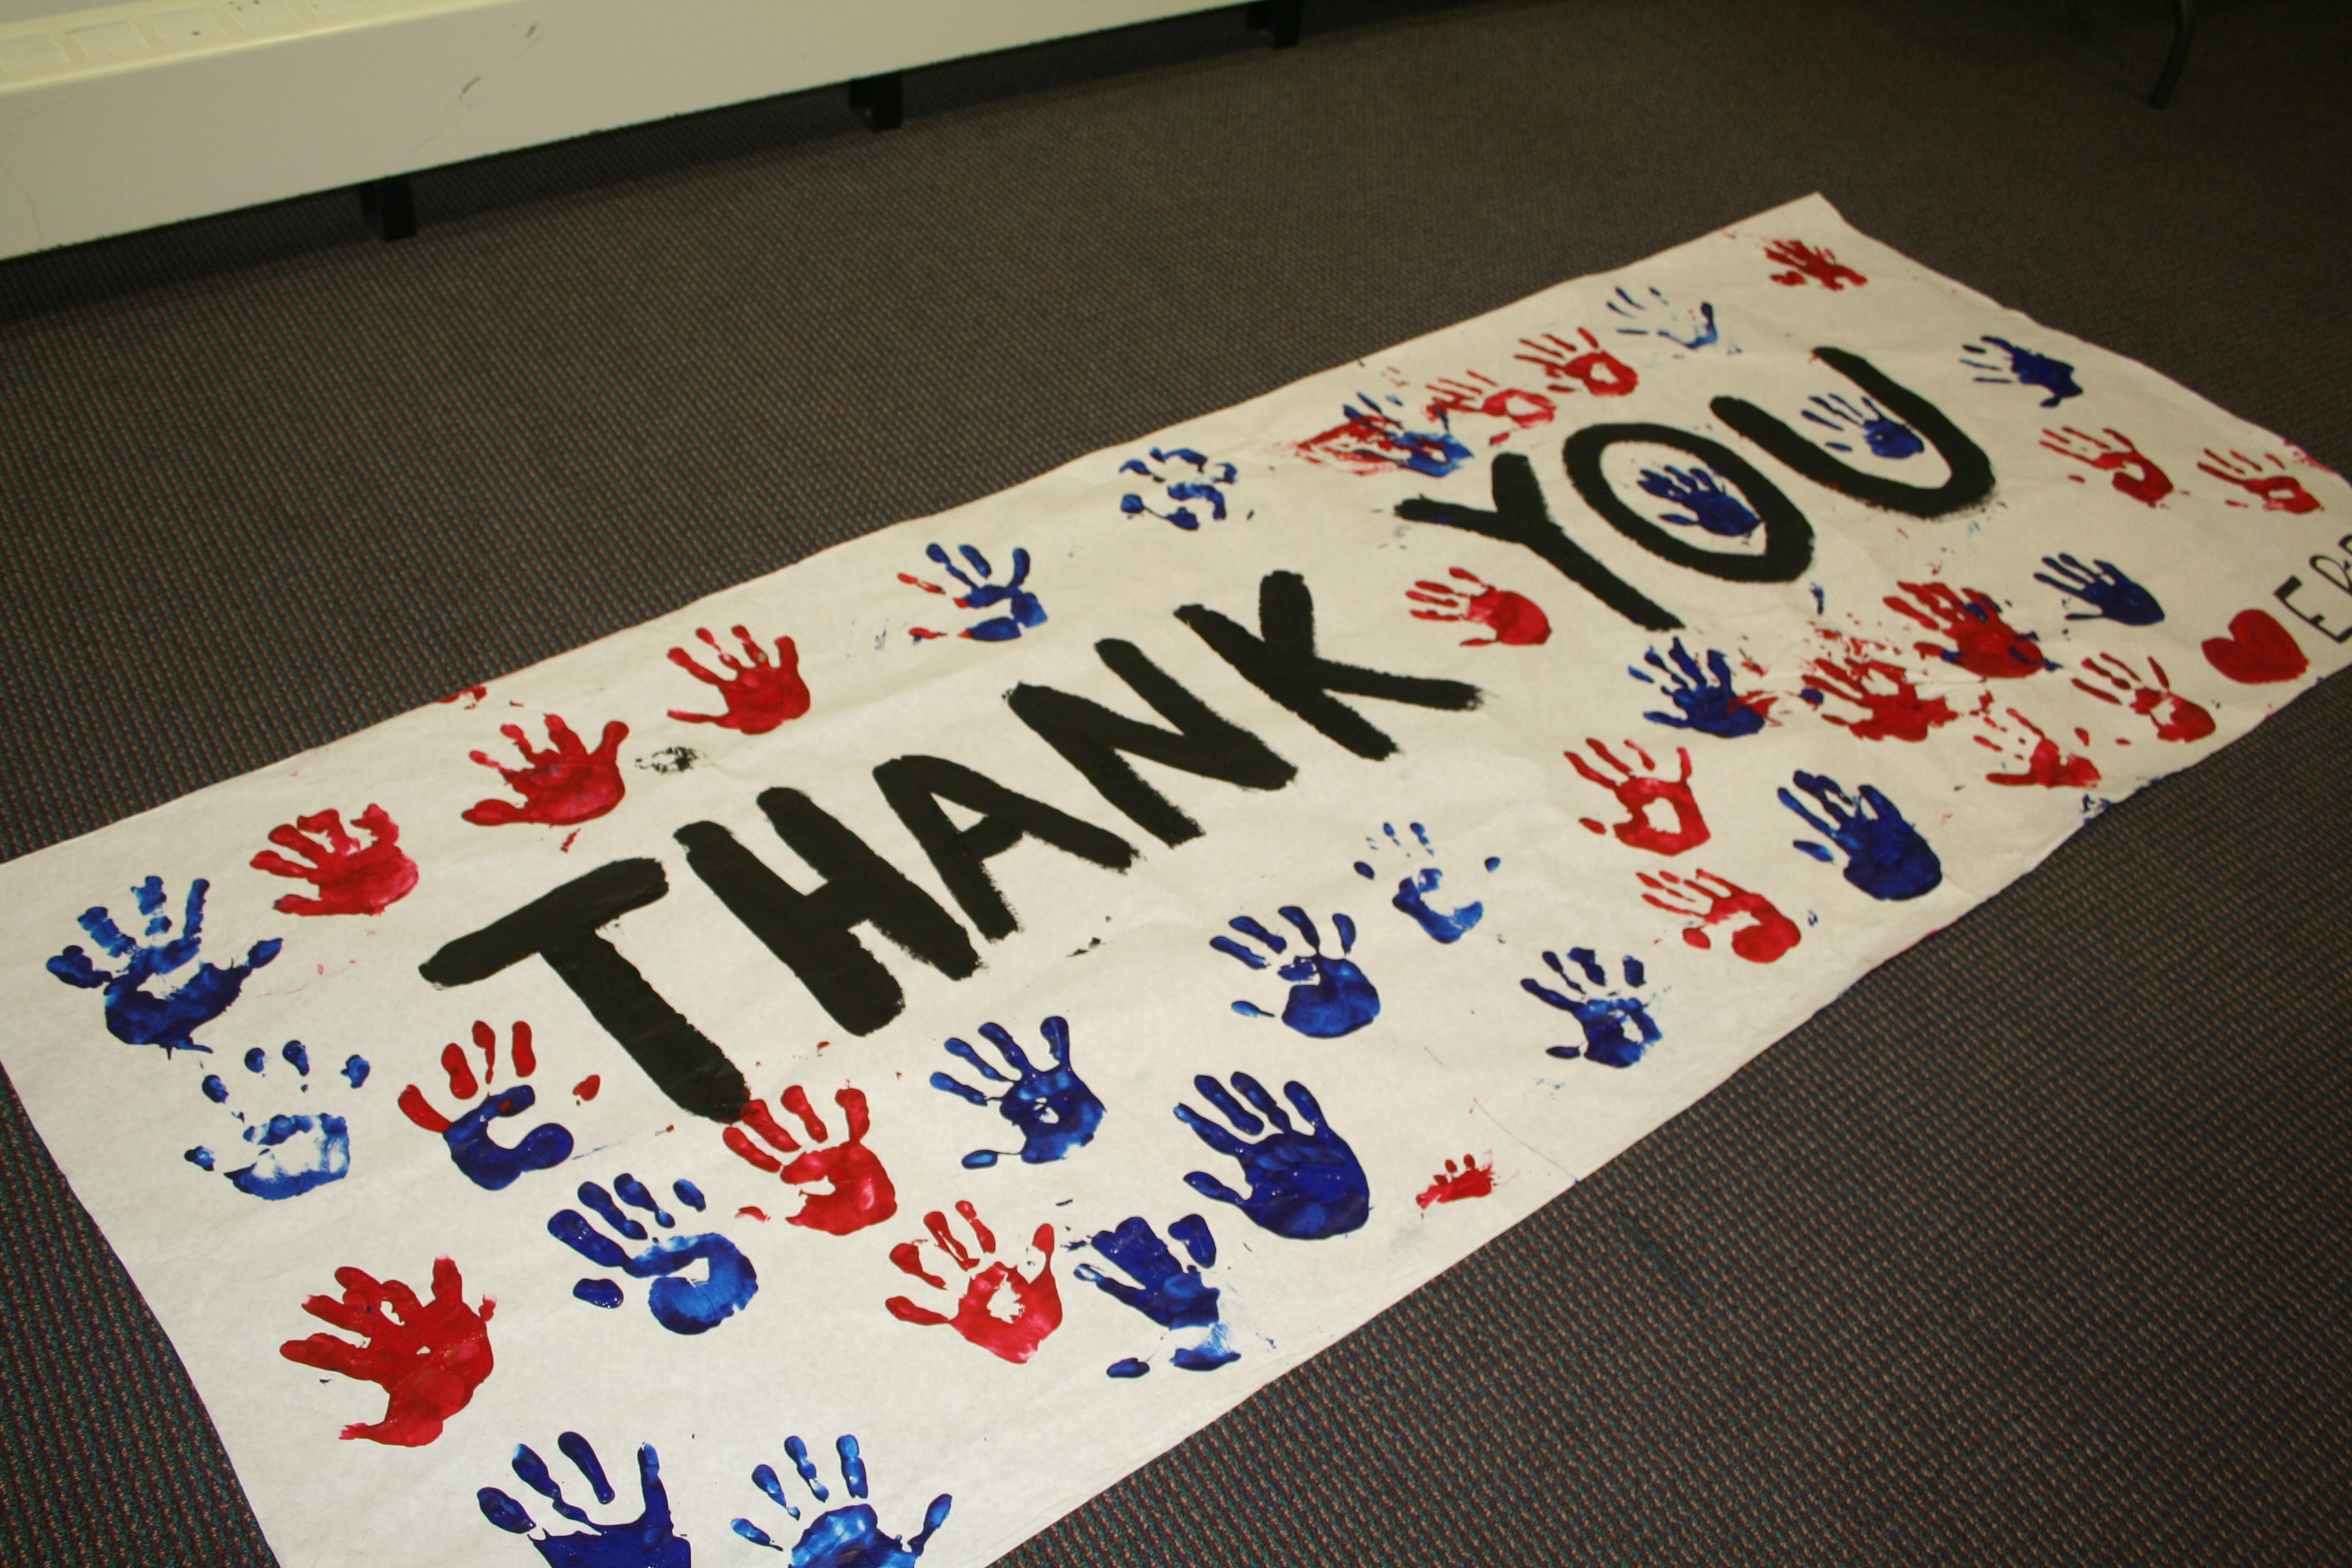 A “Thank You” poster for U.S. troops is displayed on a gray carpet. The poster includes red and blue handprints and the words “Thank You” hand painted in large letters.